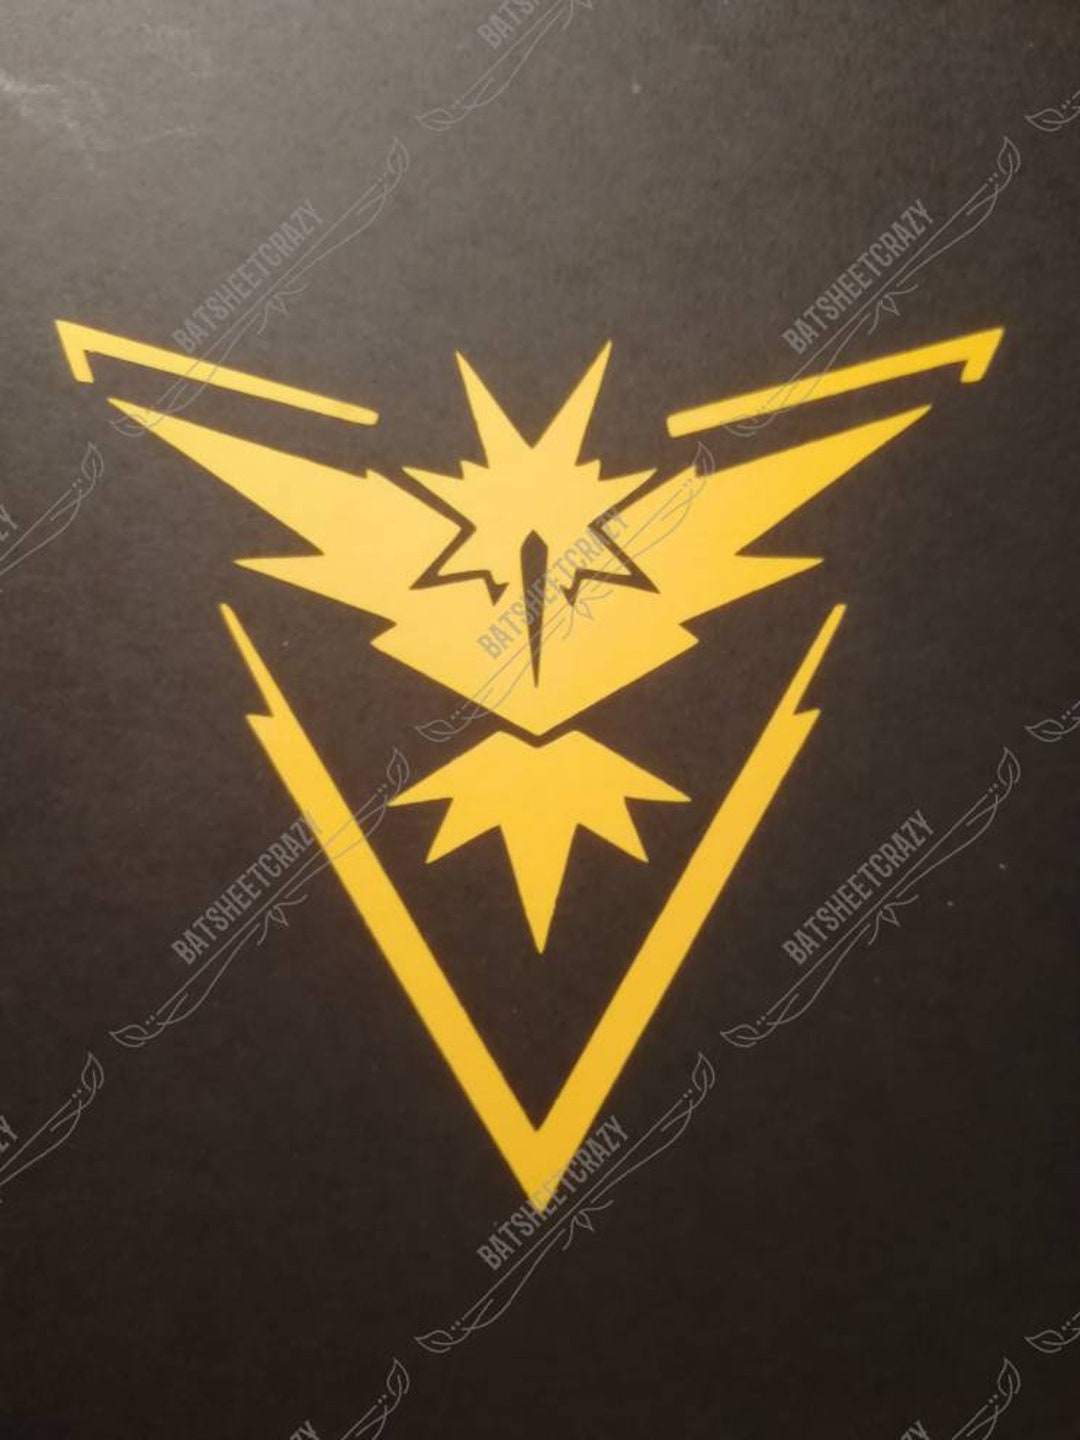 World of Warcraft Horde symbol adhesive vinyl decal for  car/laptop/wall/folder or as bumper sticker.